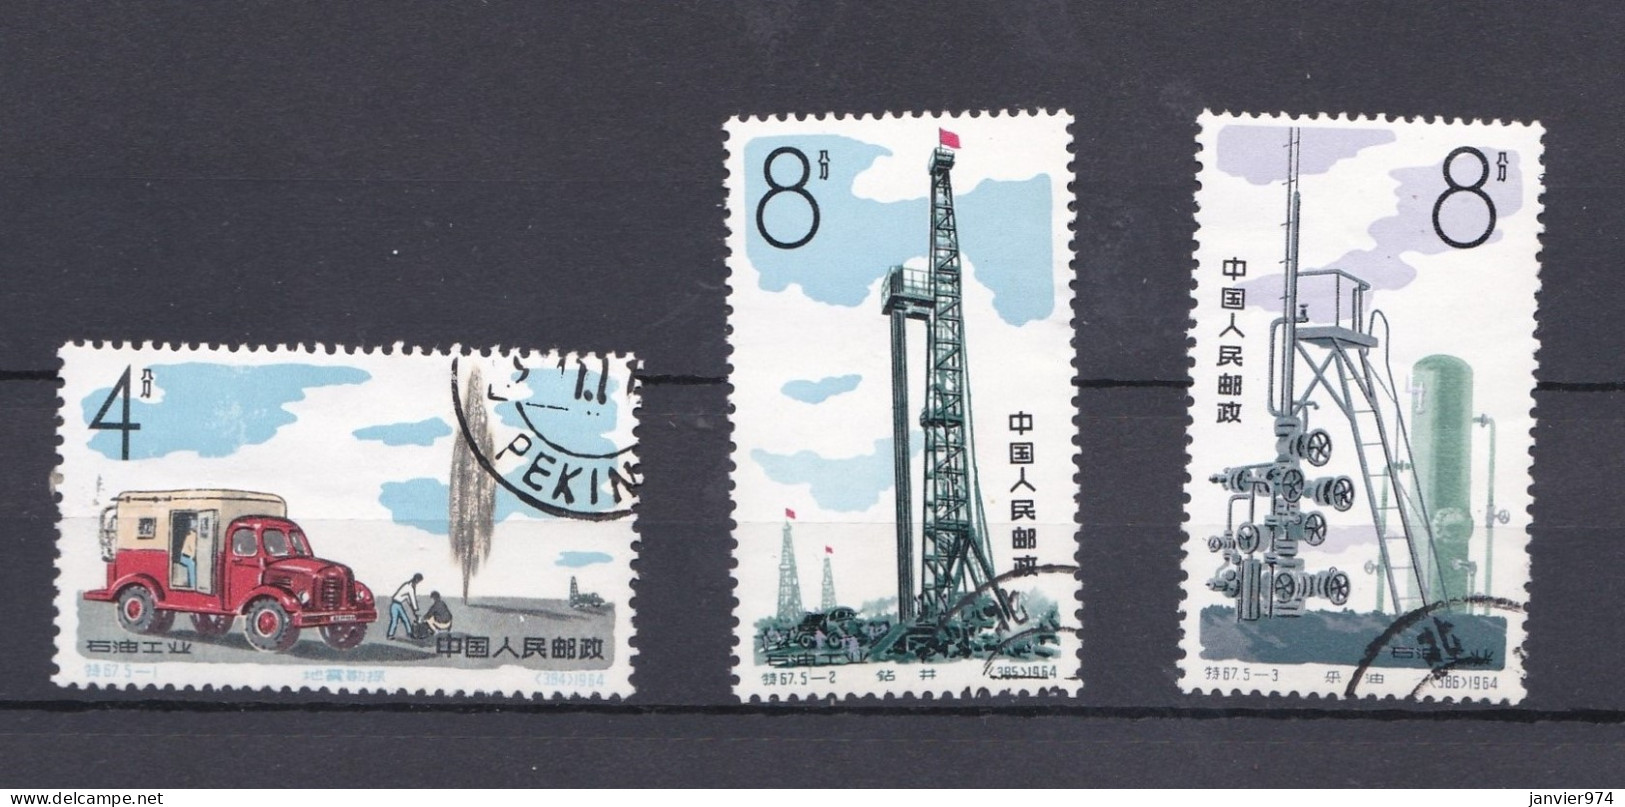 Chine 1964 , Industrie Du Pétrole, 3 Timbres , Scan Recto Verso - Gebruikt